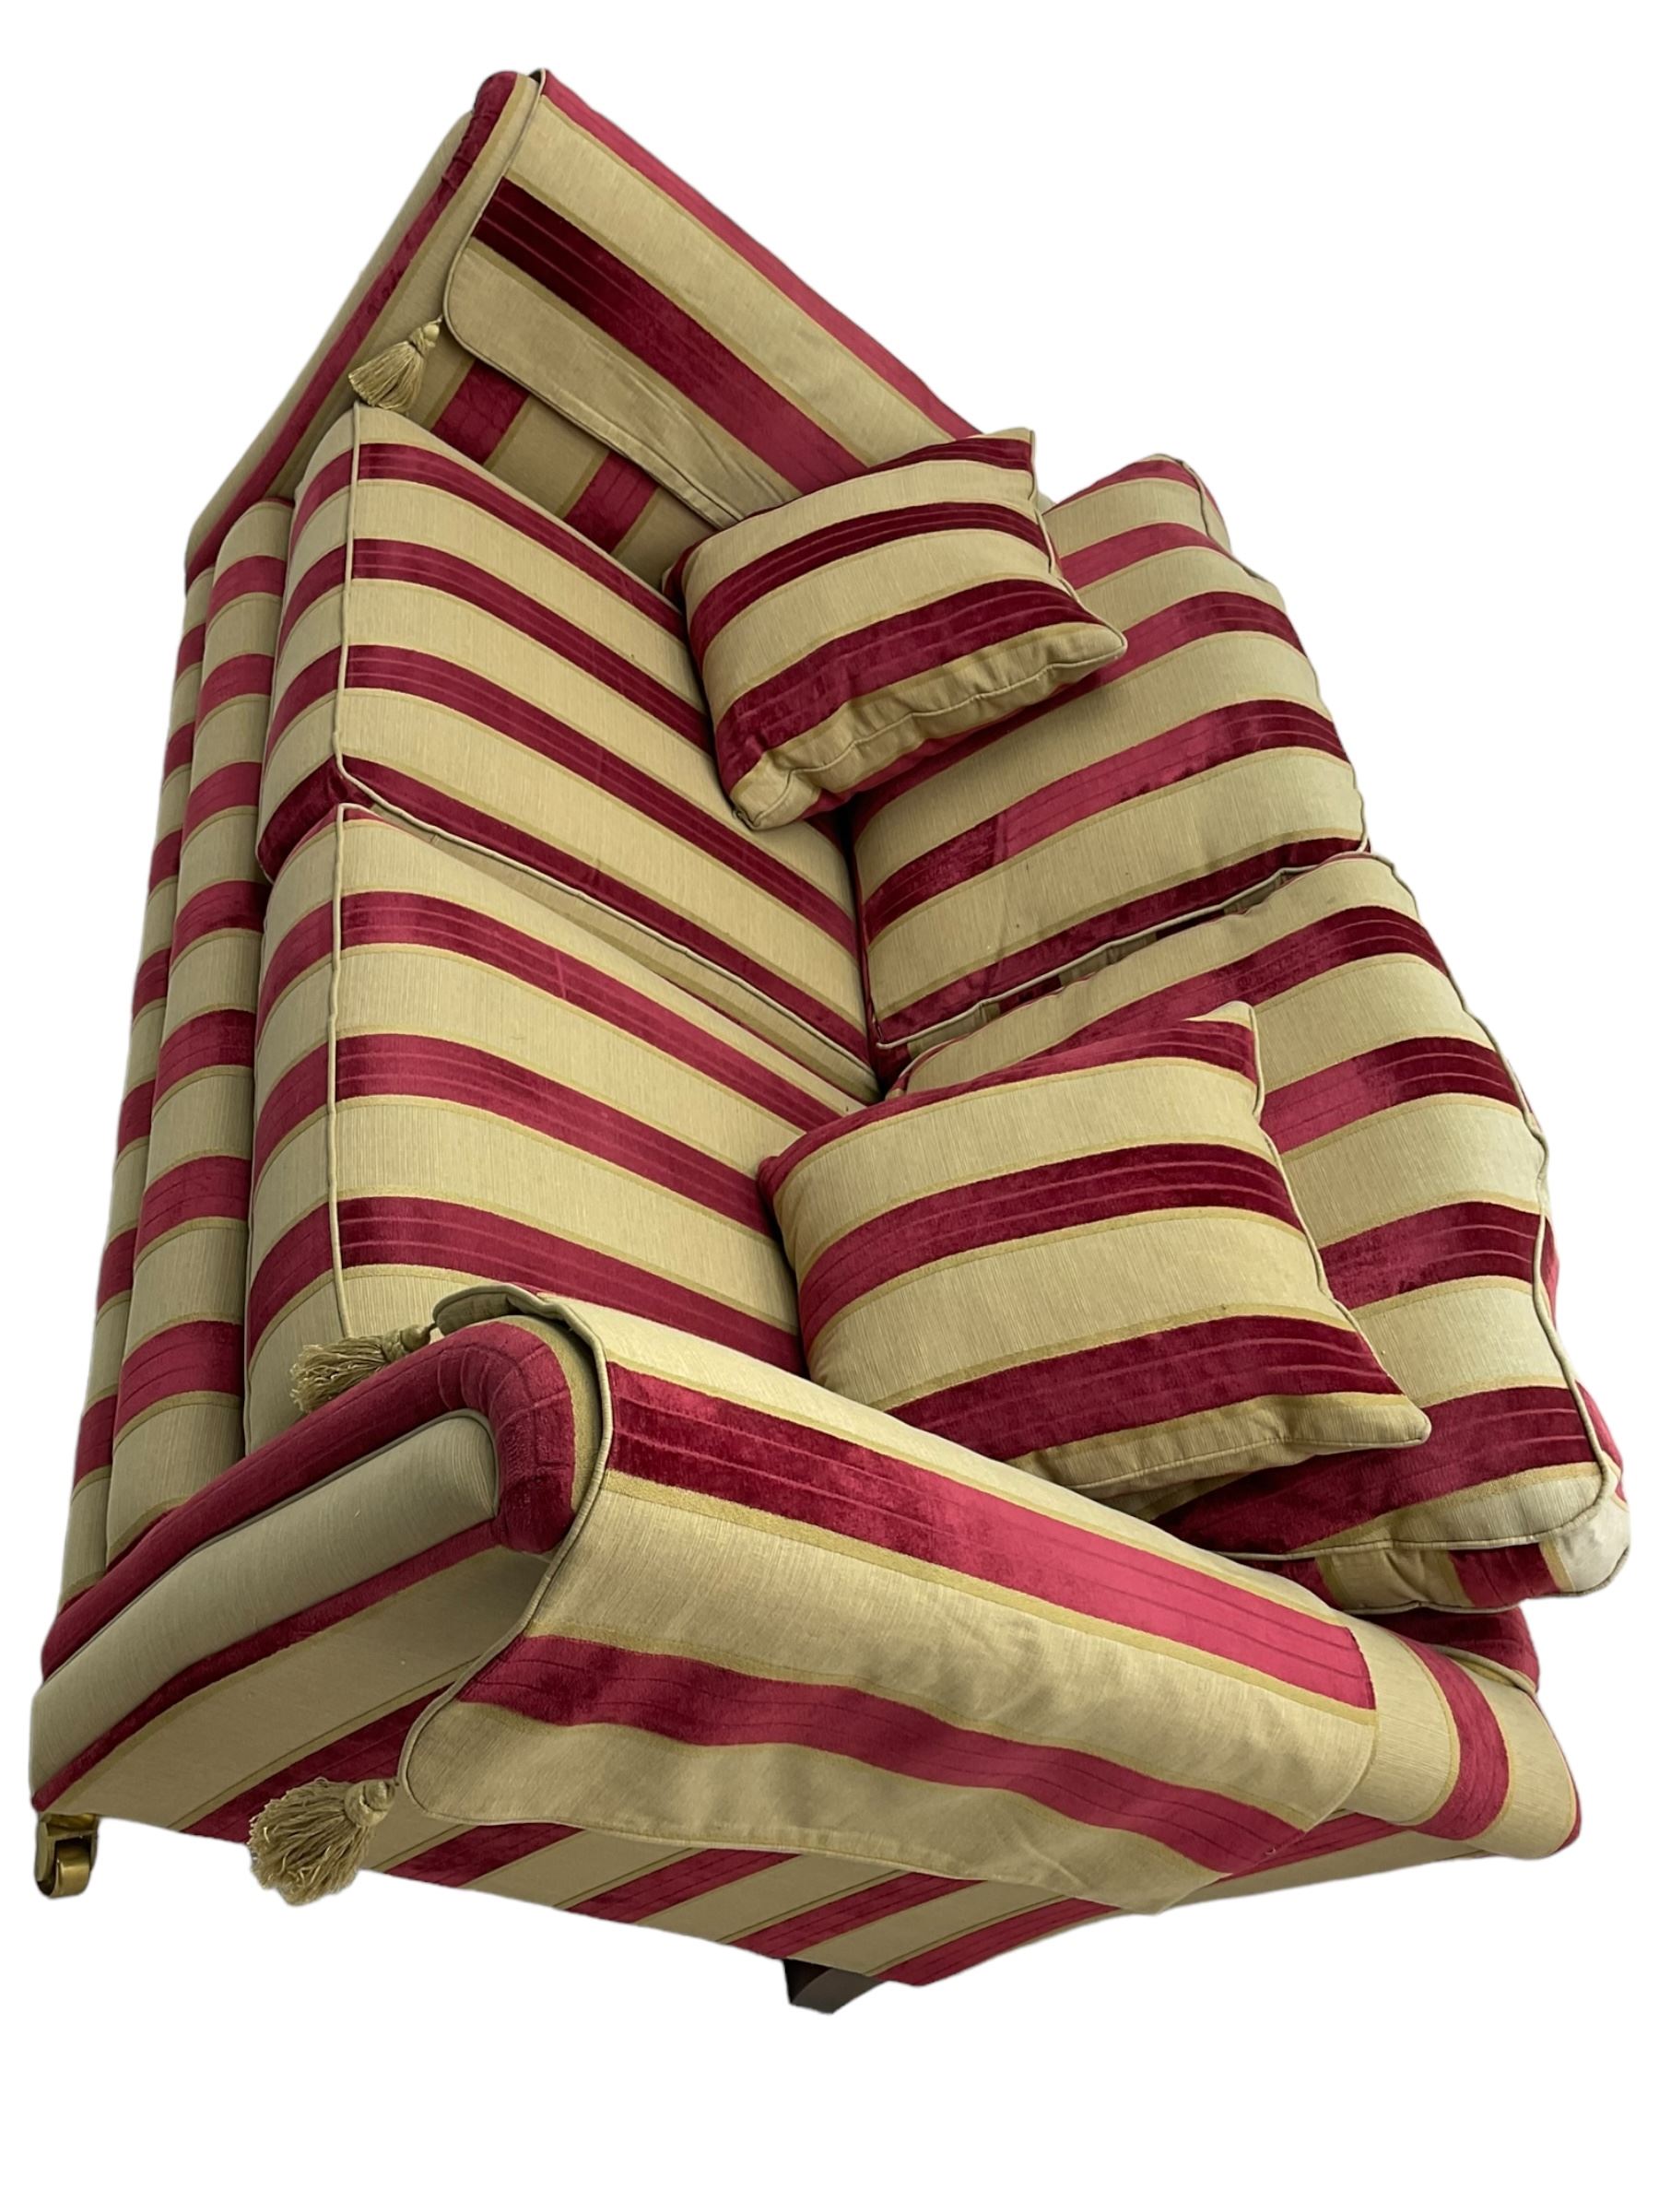 Three-piece lounge suite - large two-seat sofa upholstered in red and gold striped fabric (W185cm - Image 23 of 24